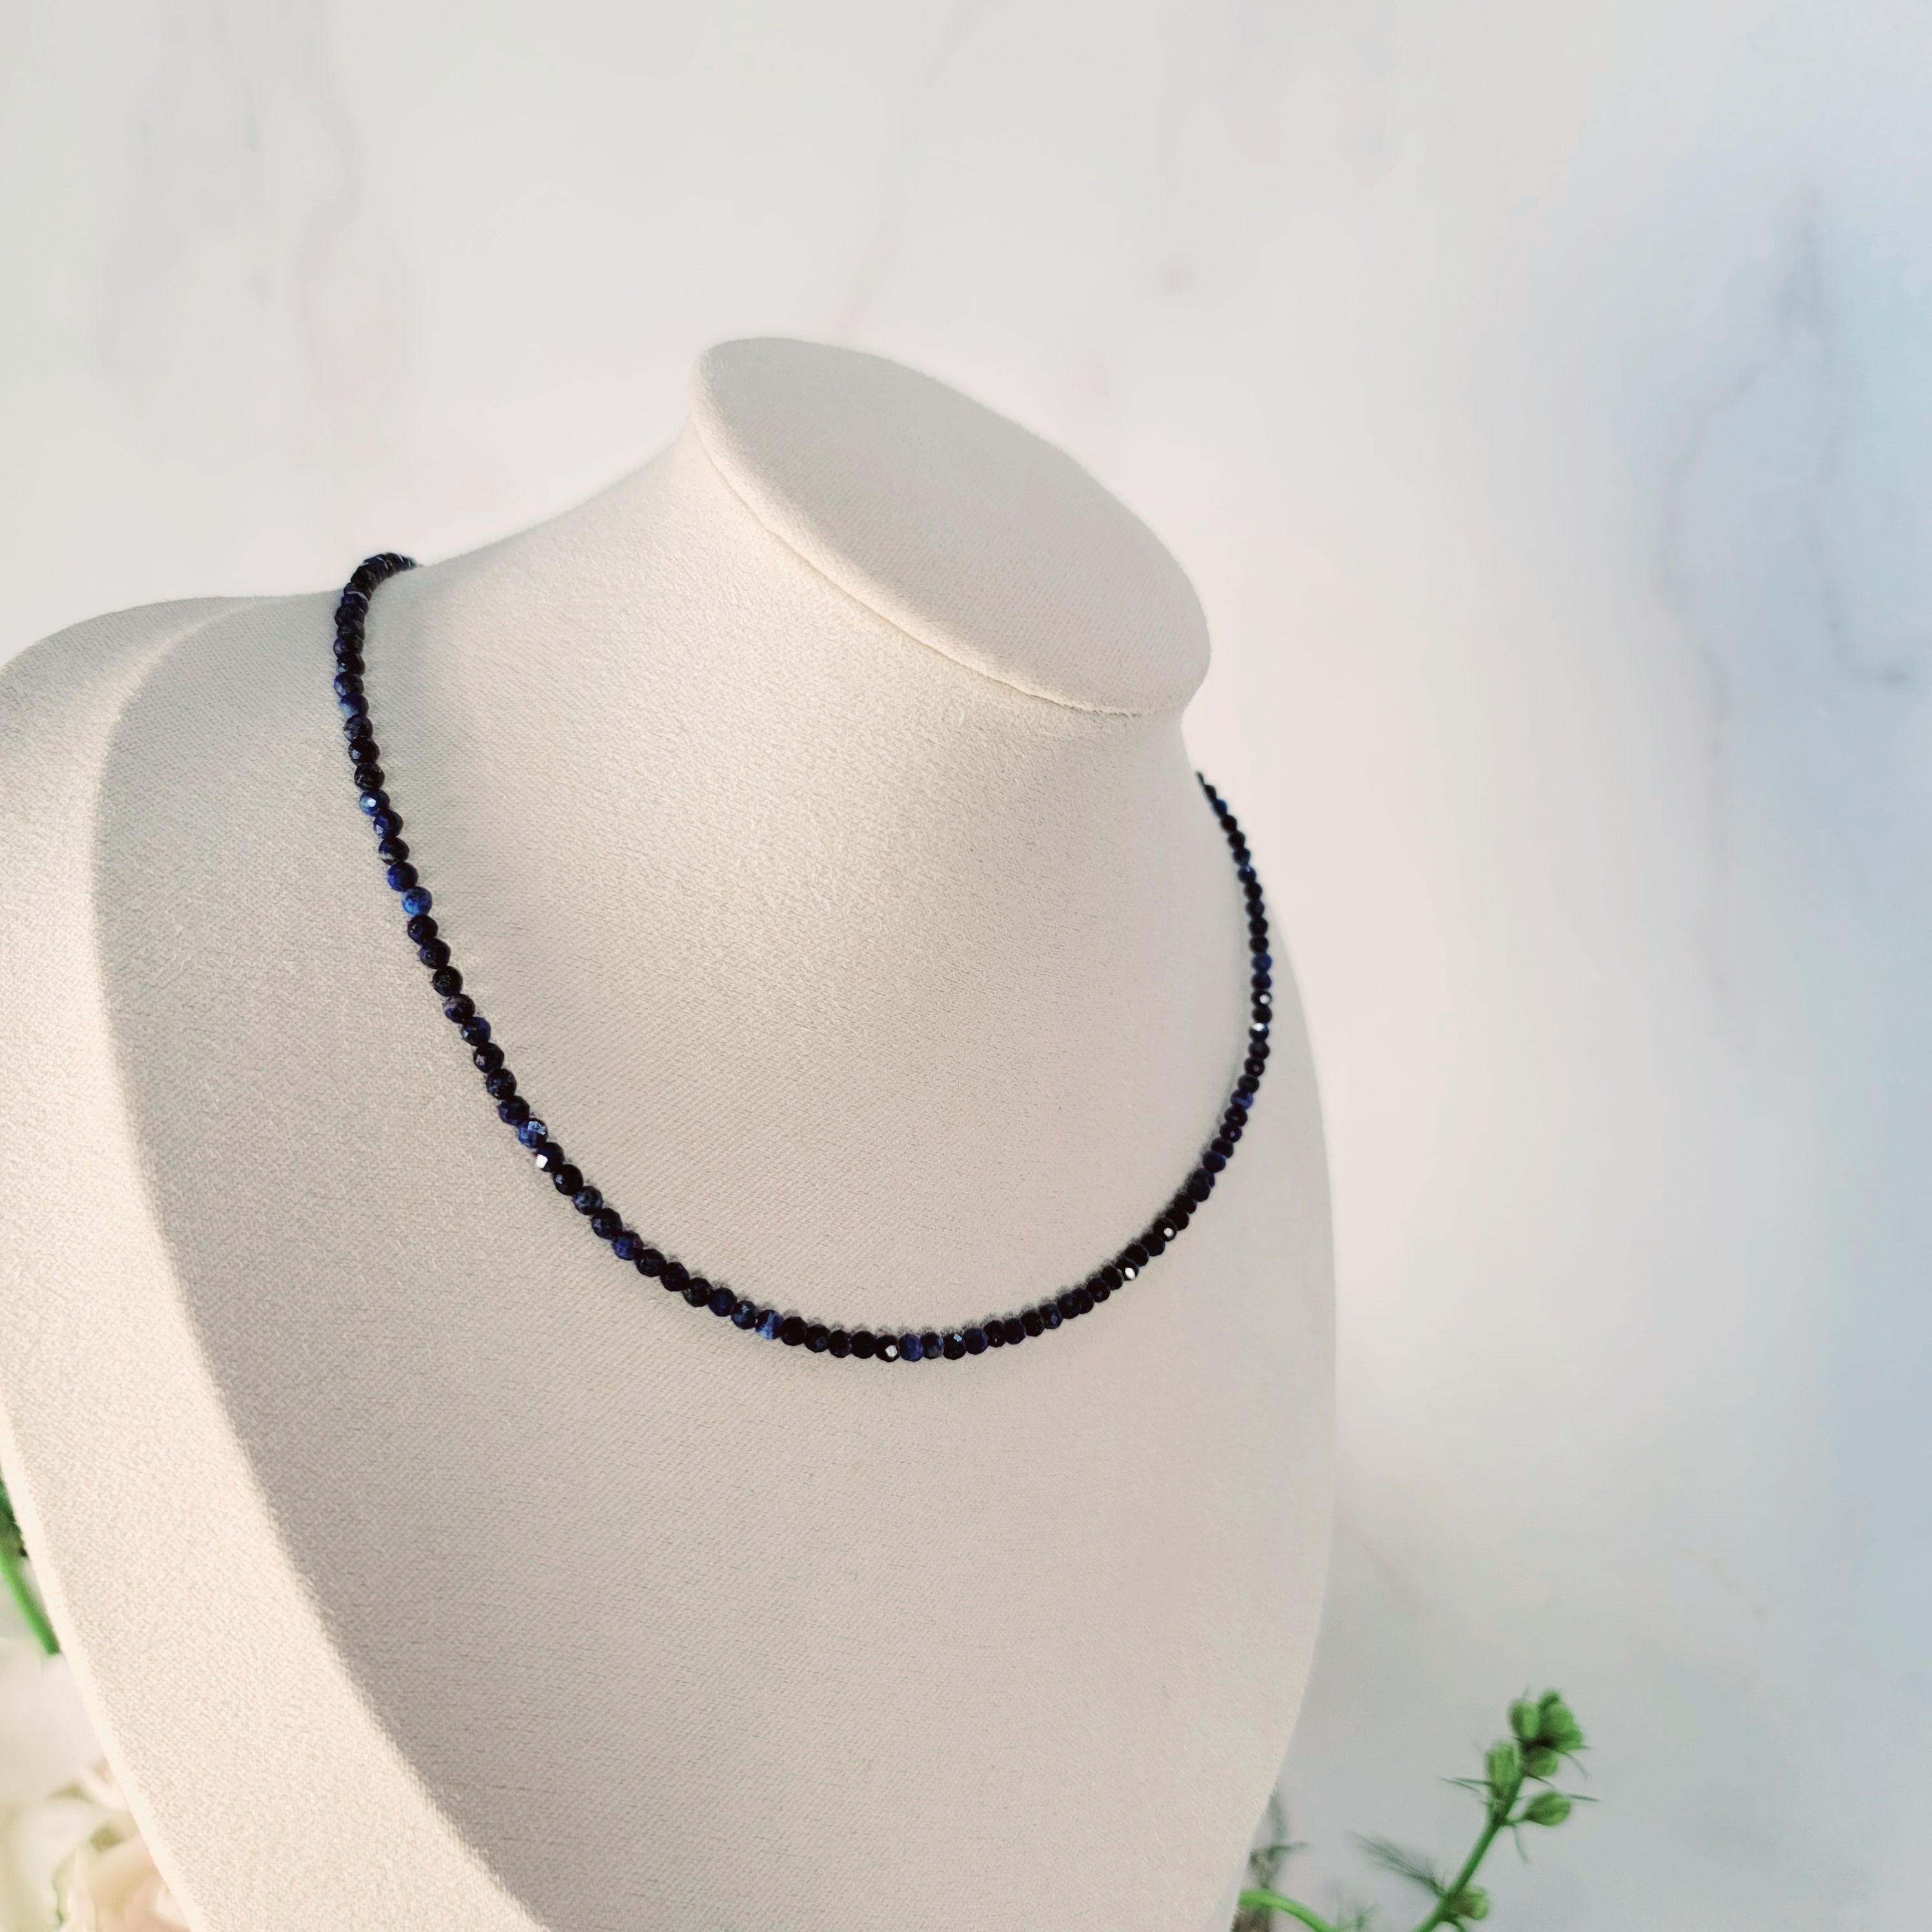 Lapis Lazuli Micro Faceted Choker/Layering Necklace for Awakening and Empowerment